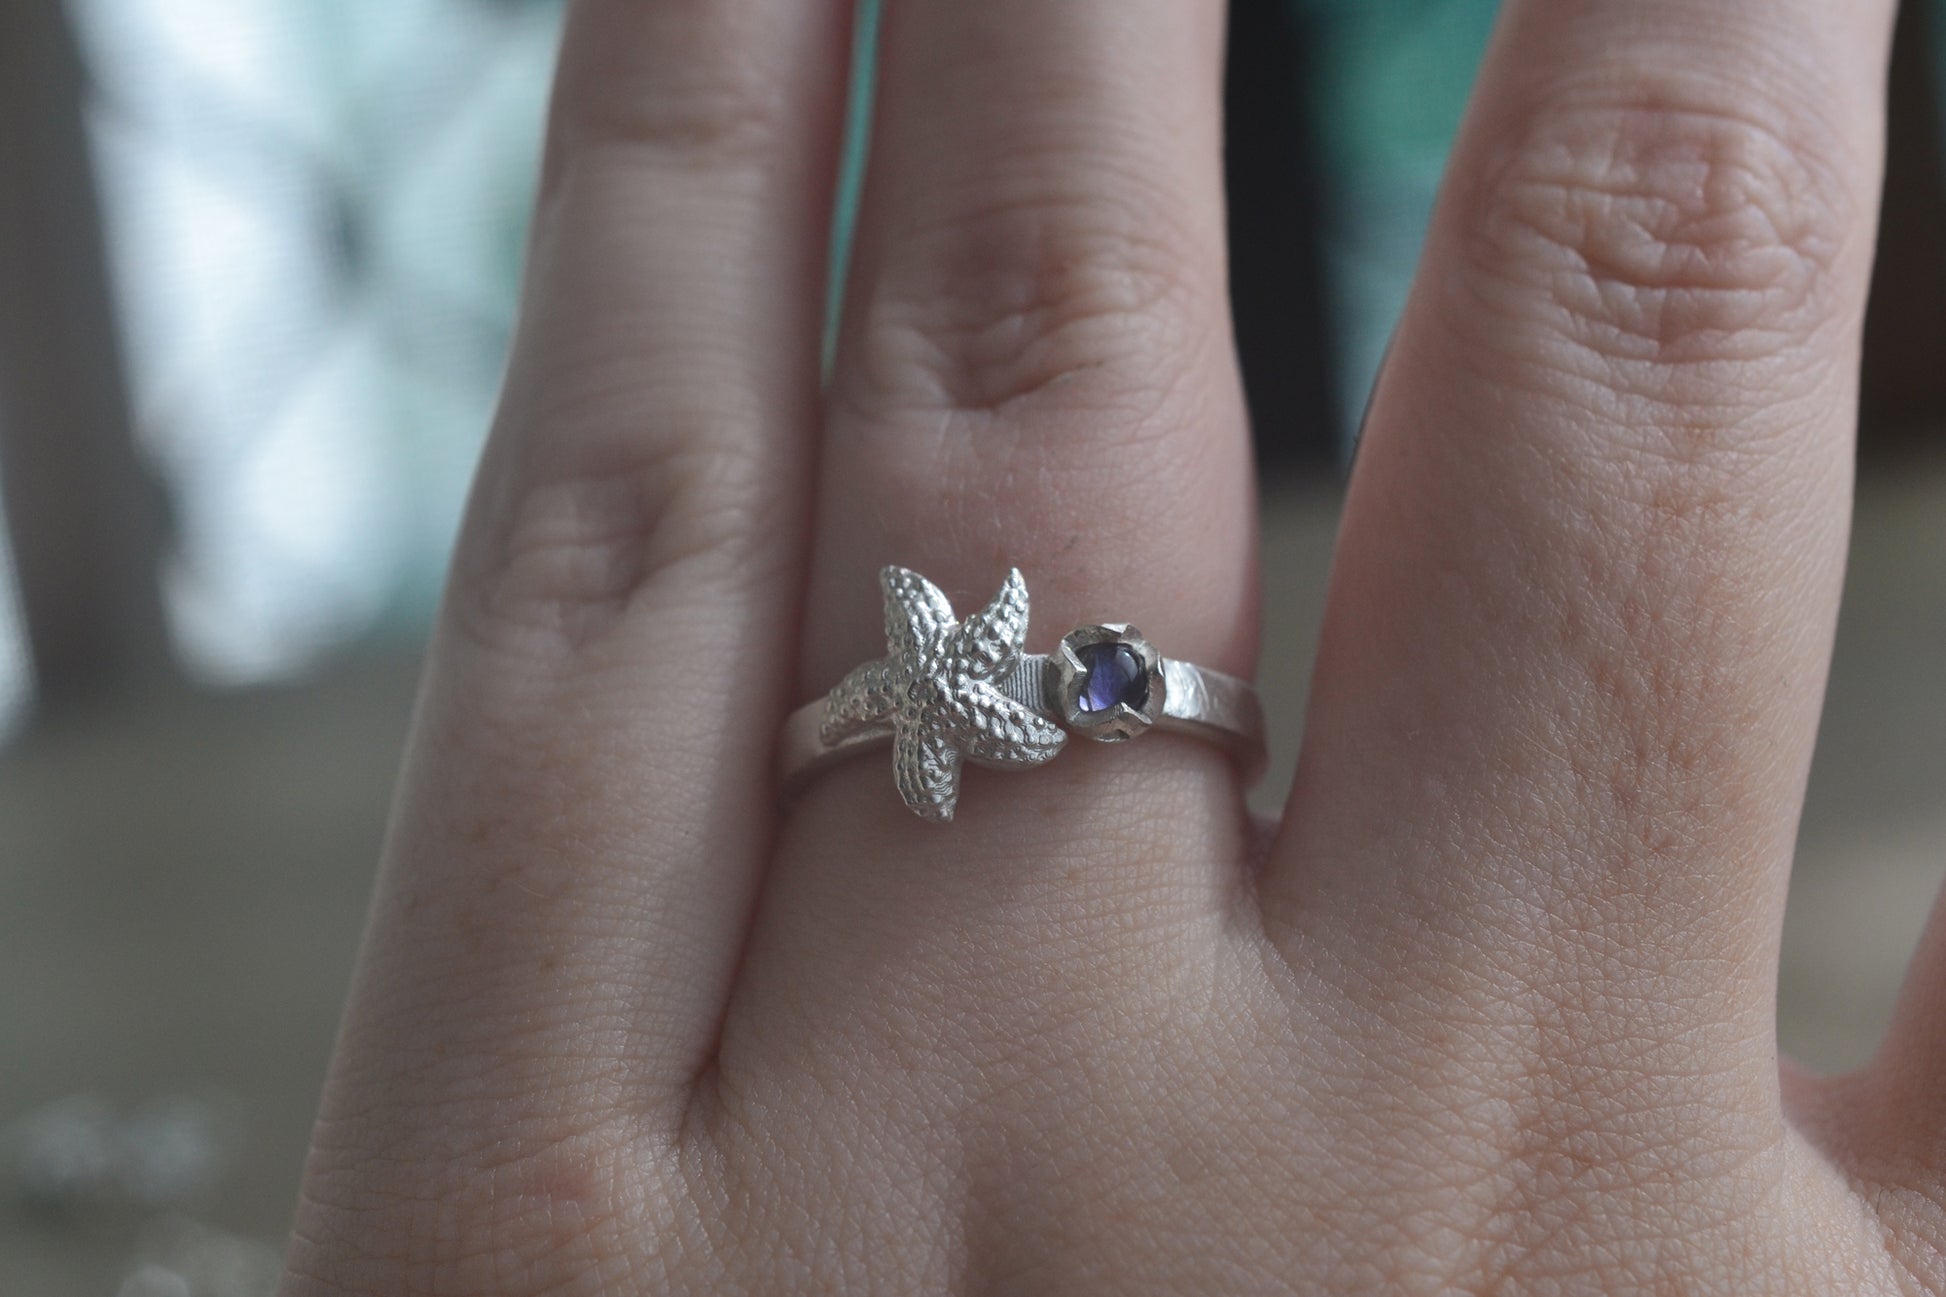 Silver Sea Star Ring With Iolite Crystal 